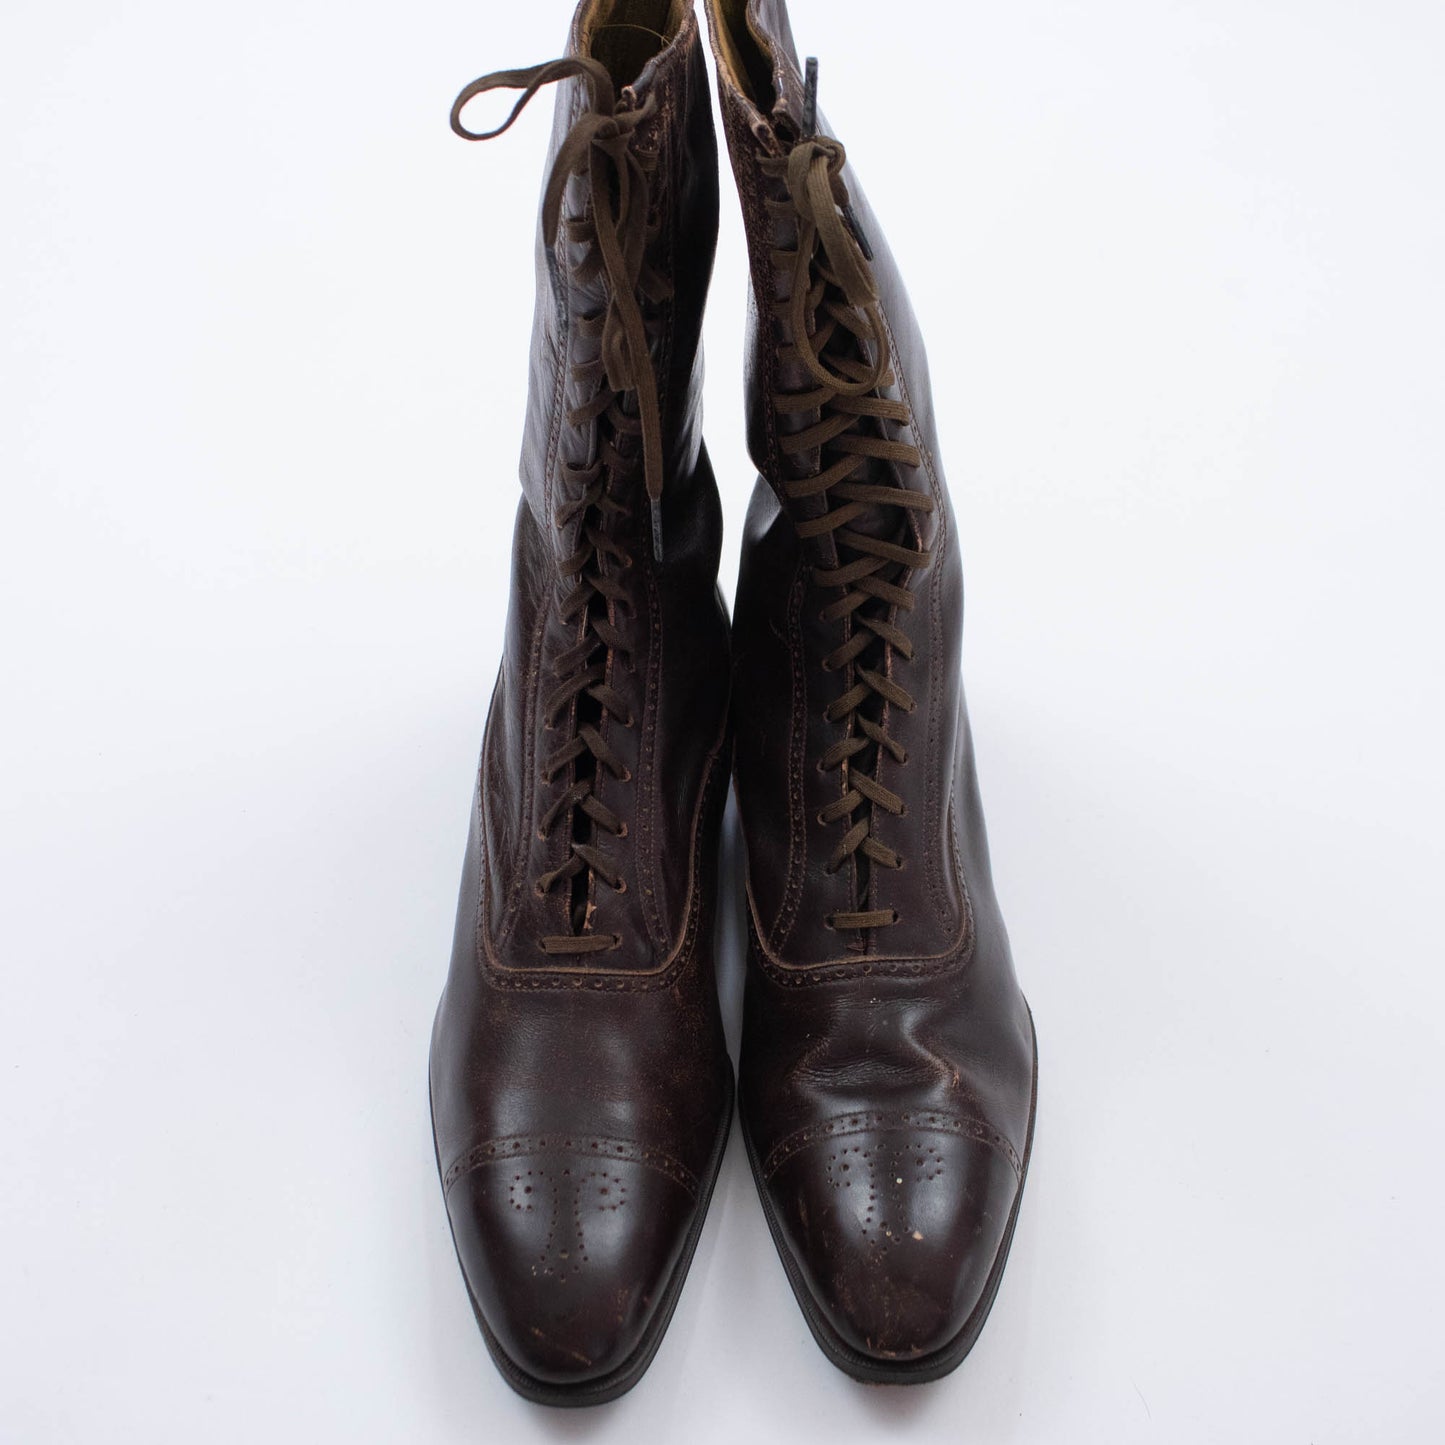 Sz 6 6.5 Victorian Leather Boots